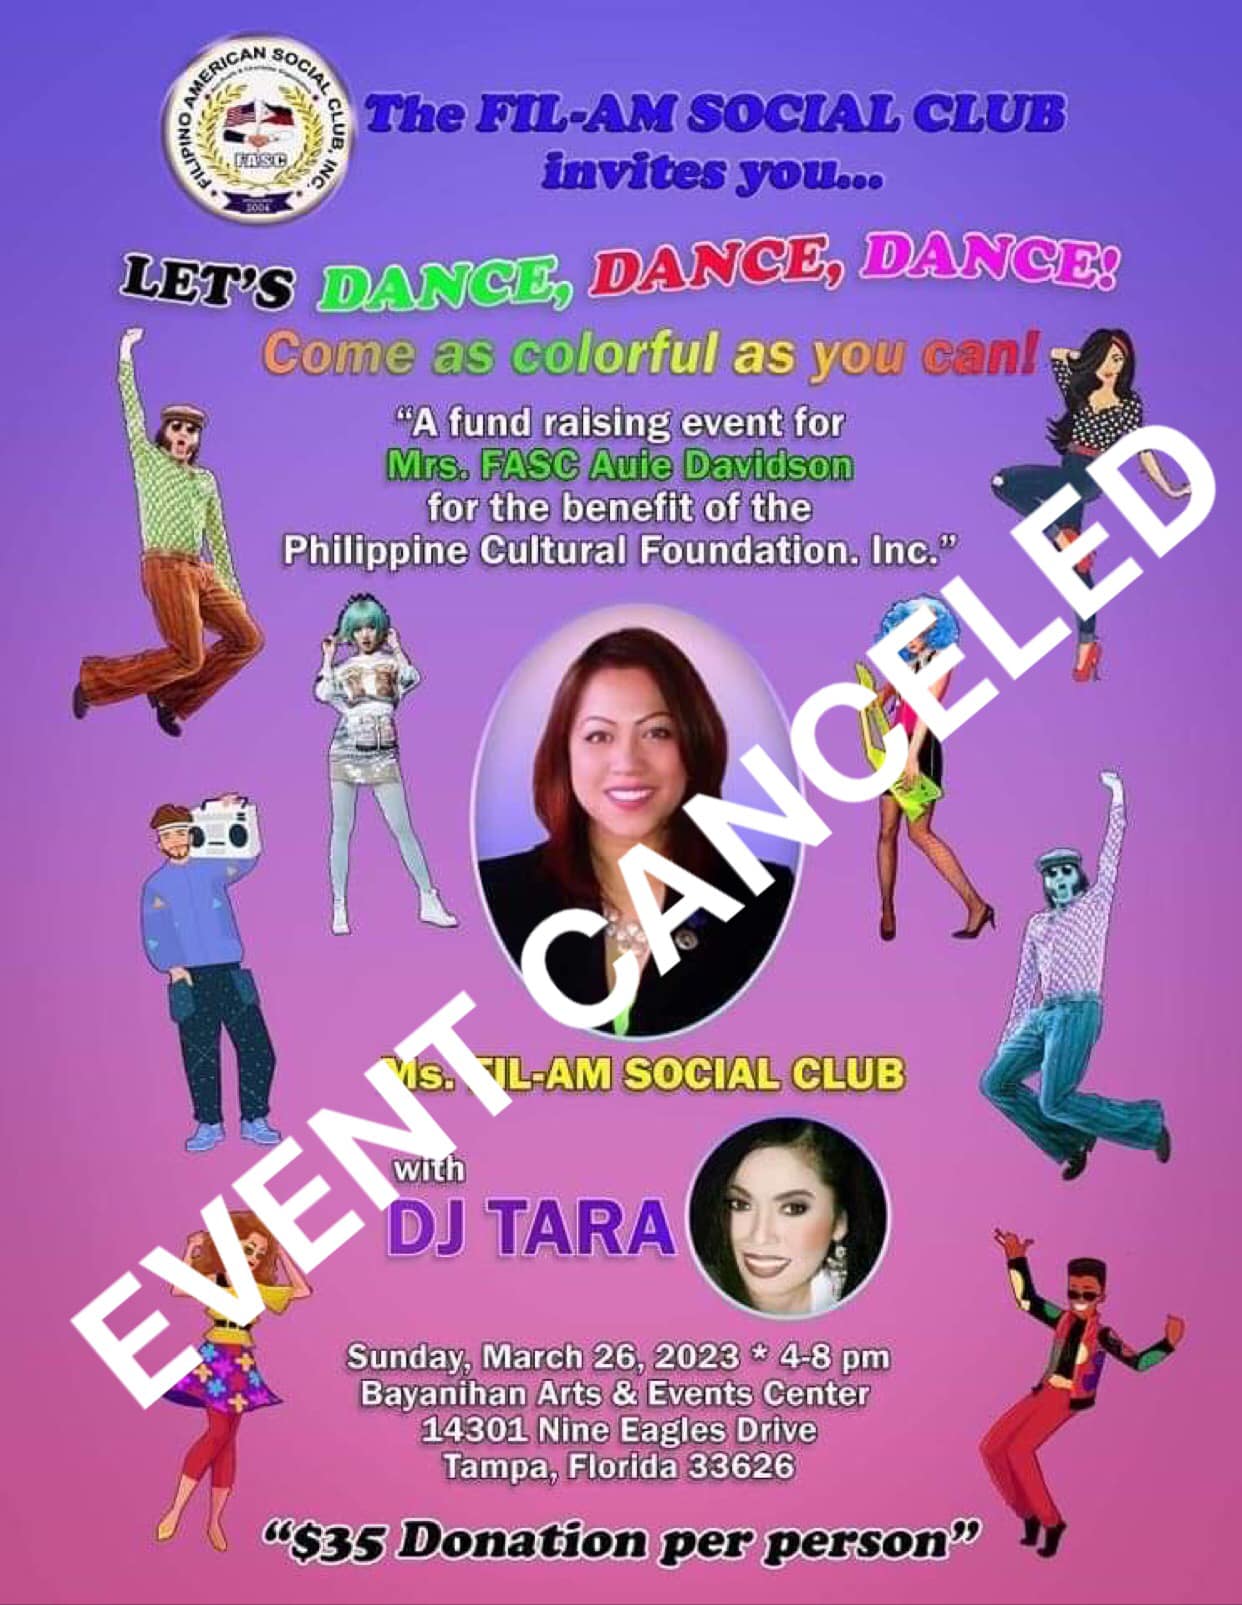 Event canceled until further notice. Sorry for the inconvenience. Watch for an update…